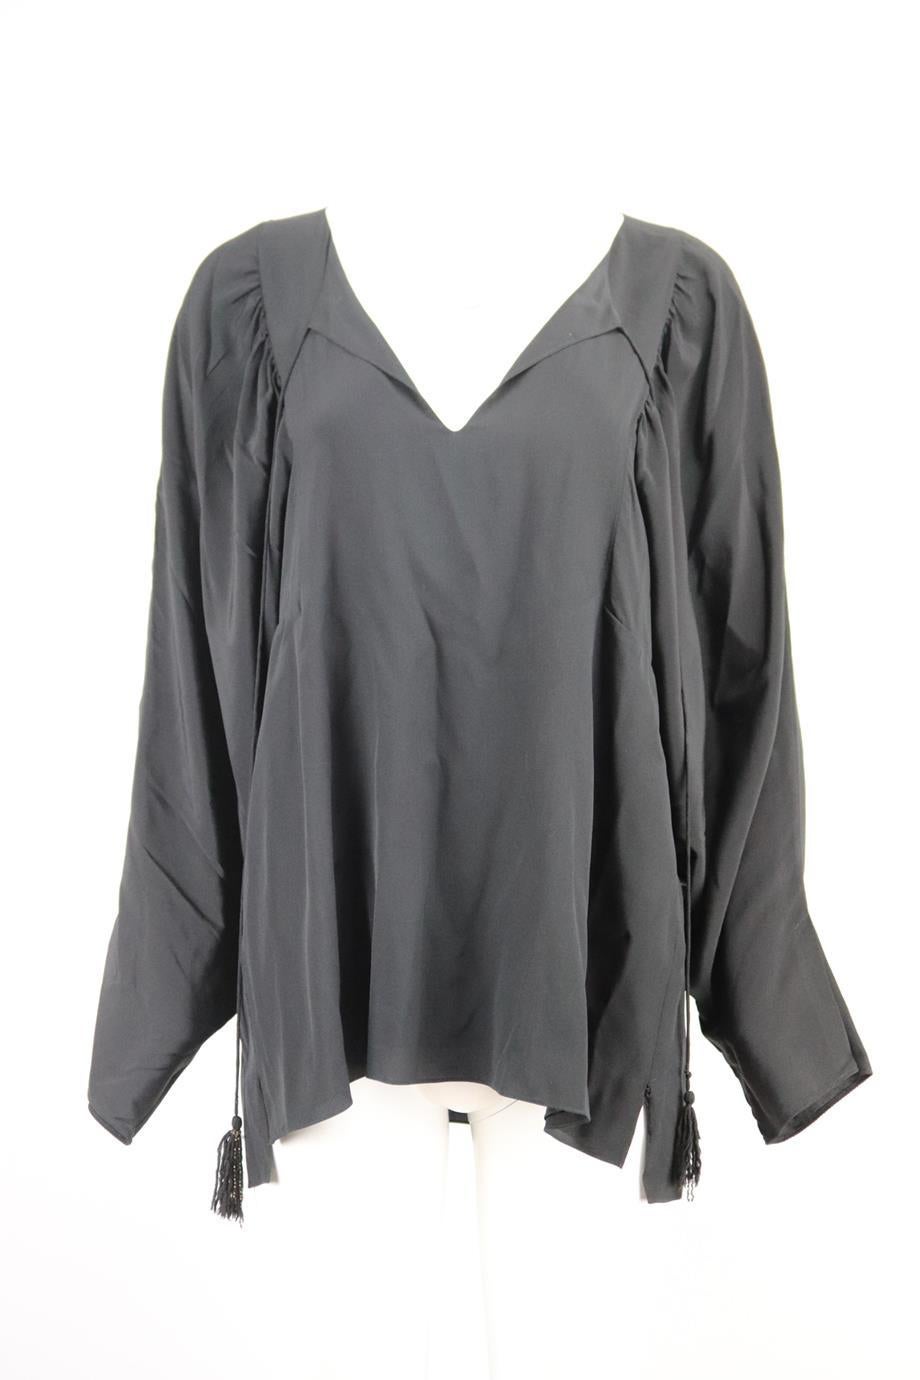 Chloé silk blouse. Black. Long sleeve, v-neck. Slips on. 100% Silk. Size: FR 40 (UK 12, US 8, IT 44). Bust: 44 in. Waist: 44 in. Hips: 50 in. Length: 26 in. Very good condition - No sign of wear; see pictures.
